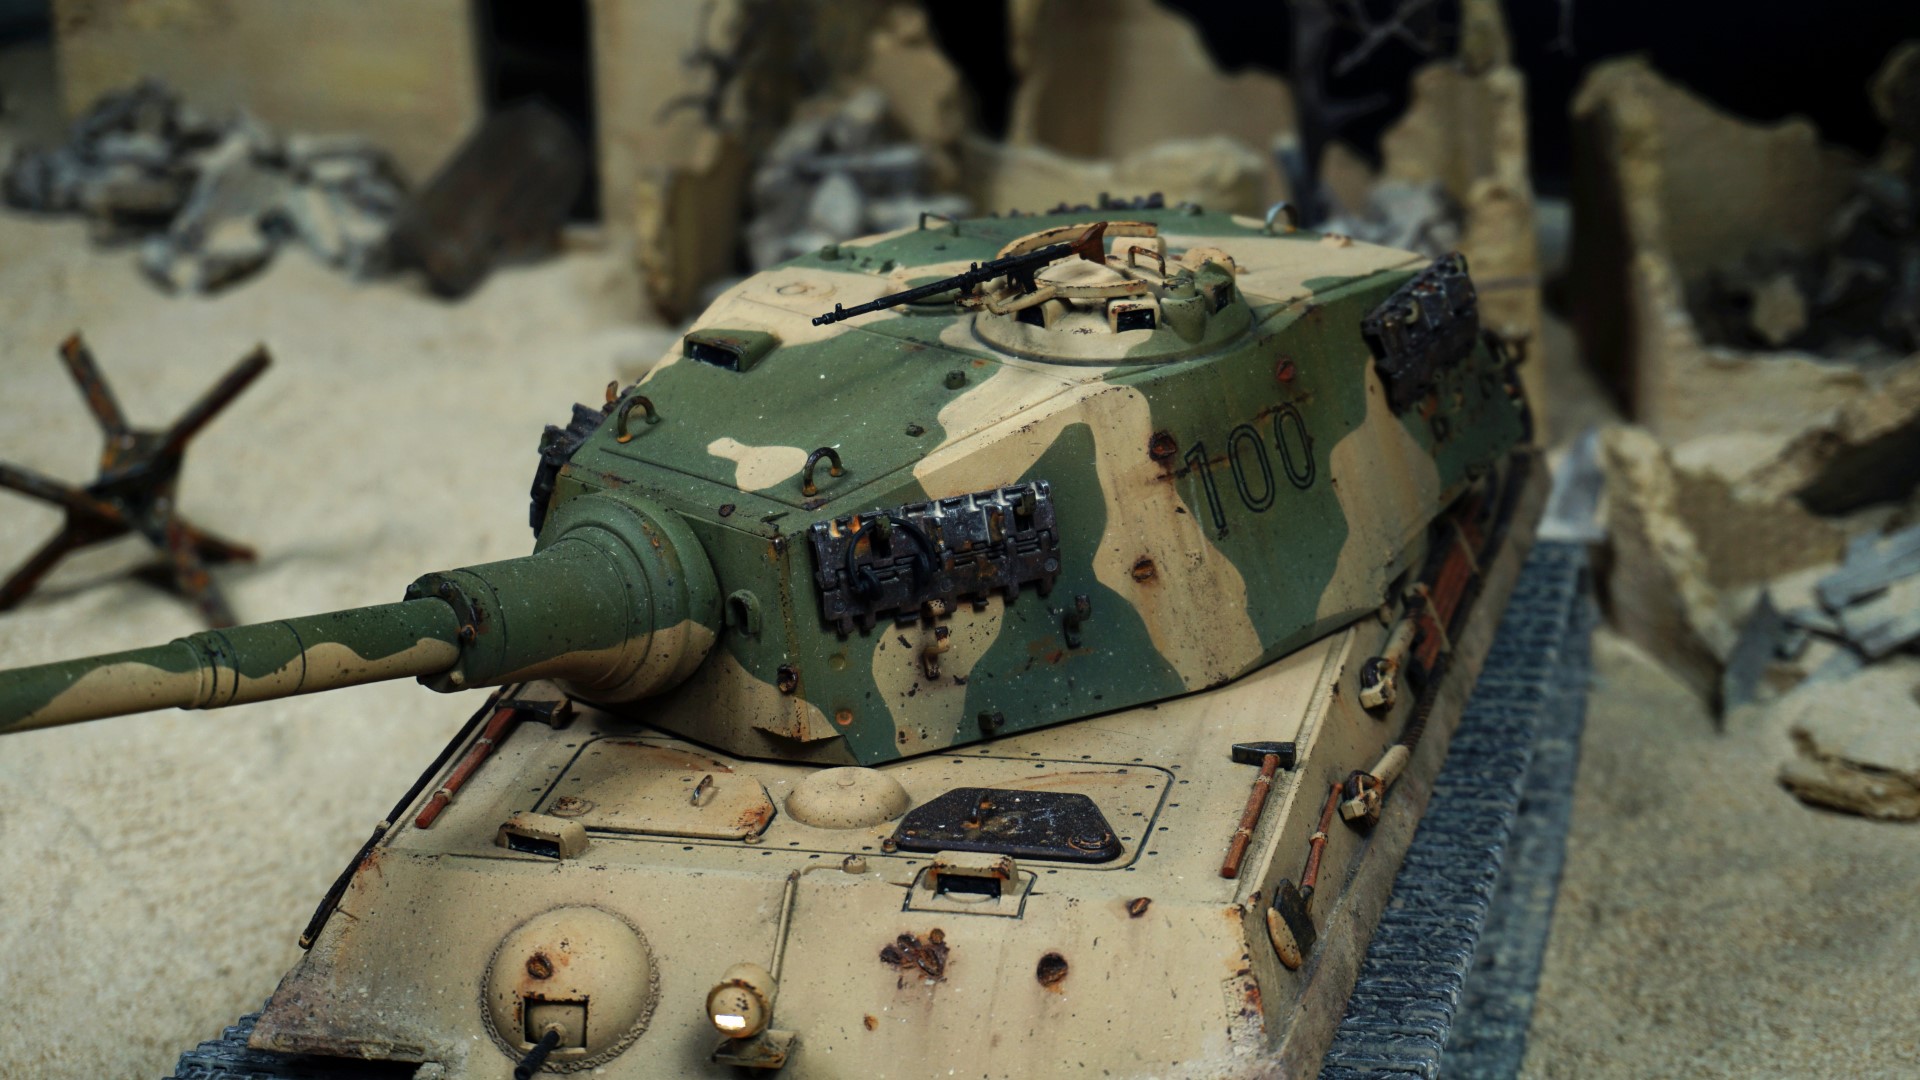 King Tiger RC Scale Model Tank Weathering, DIY Model Tank Building, Scale Model Tank Battle Damage, Rust, Excellent Detail and Aging Technique